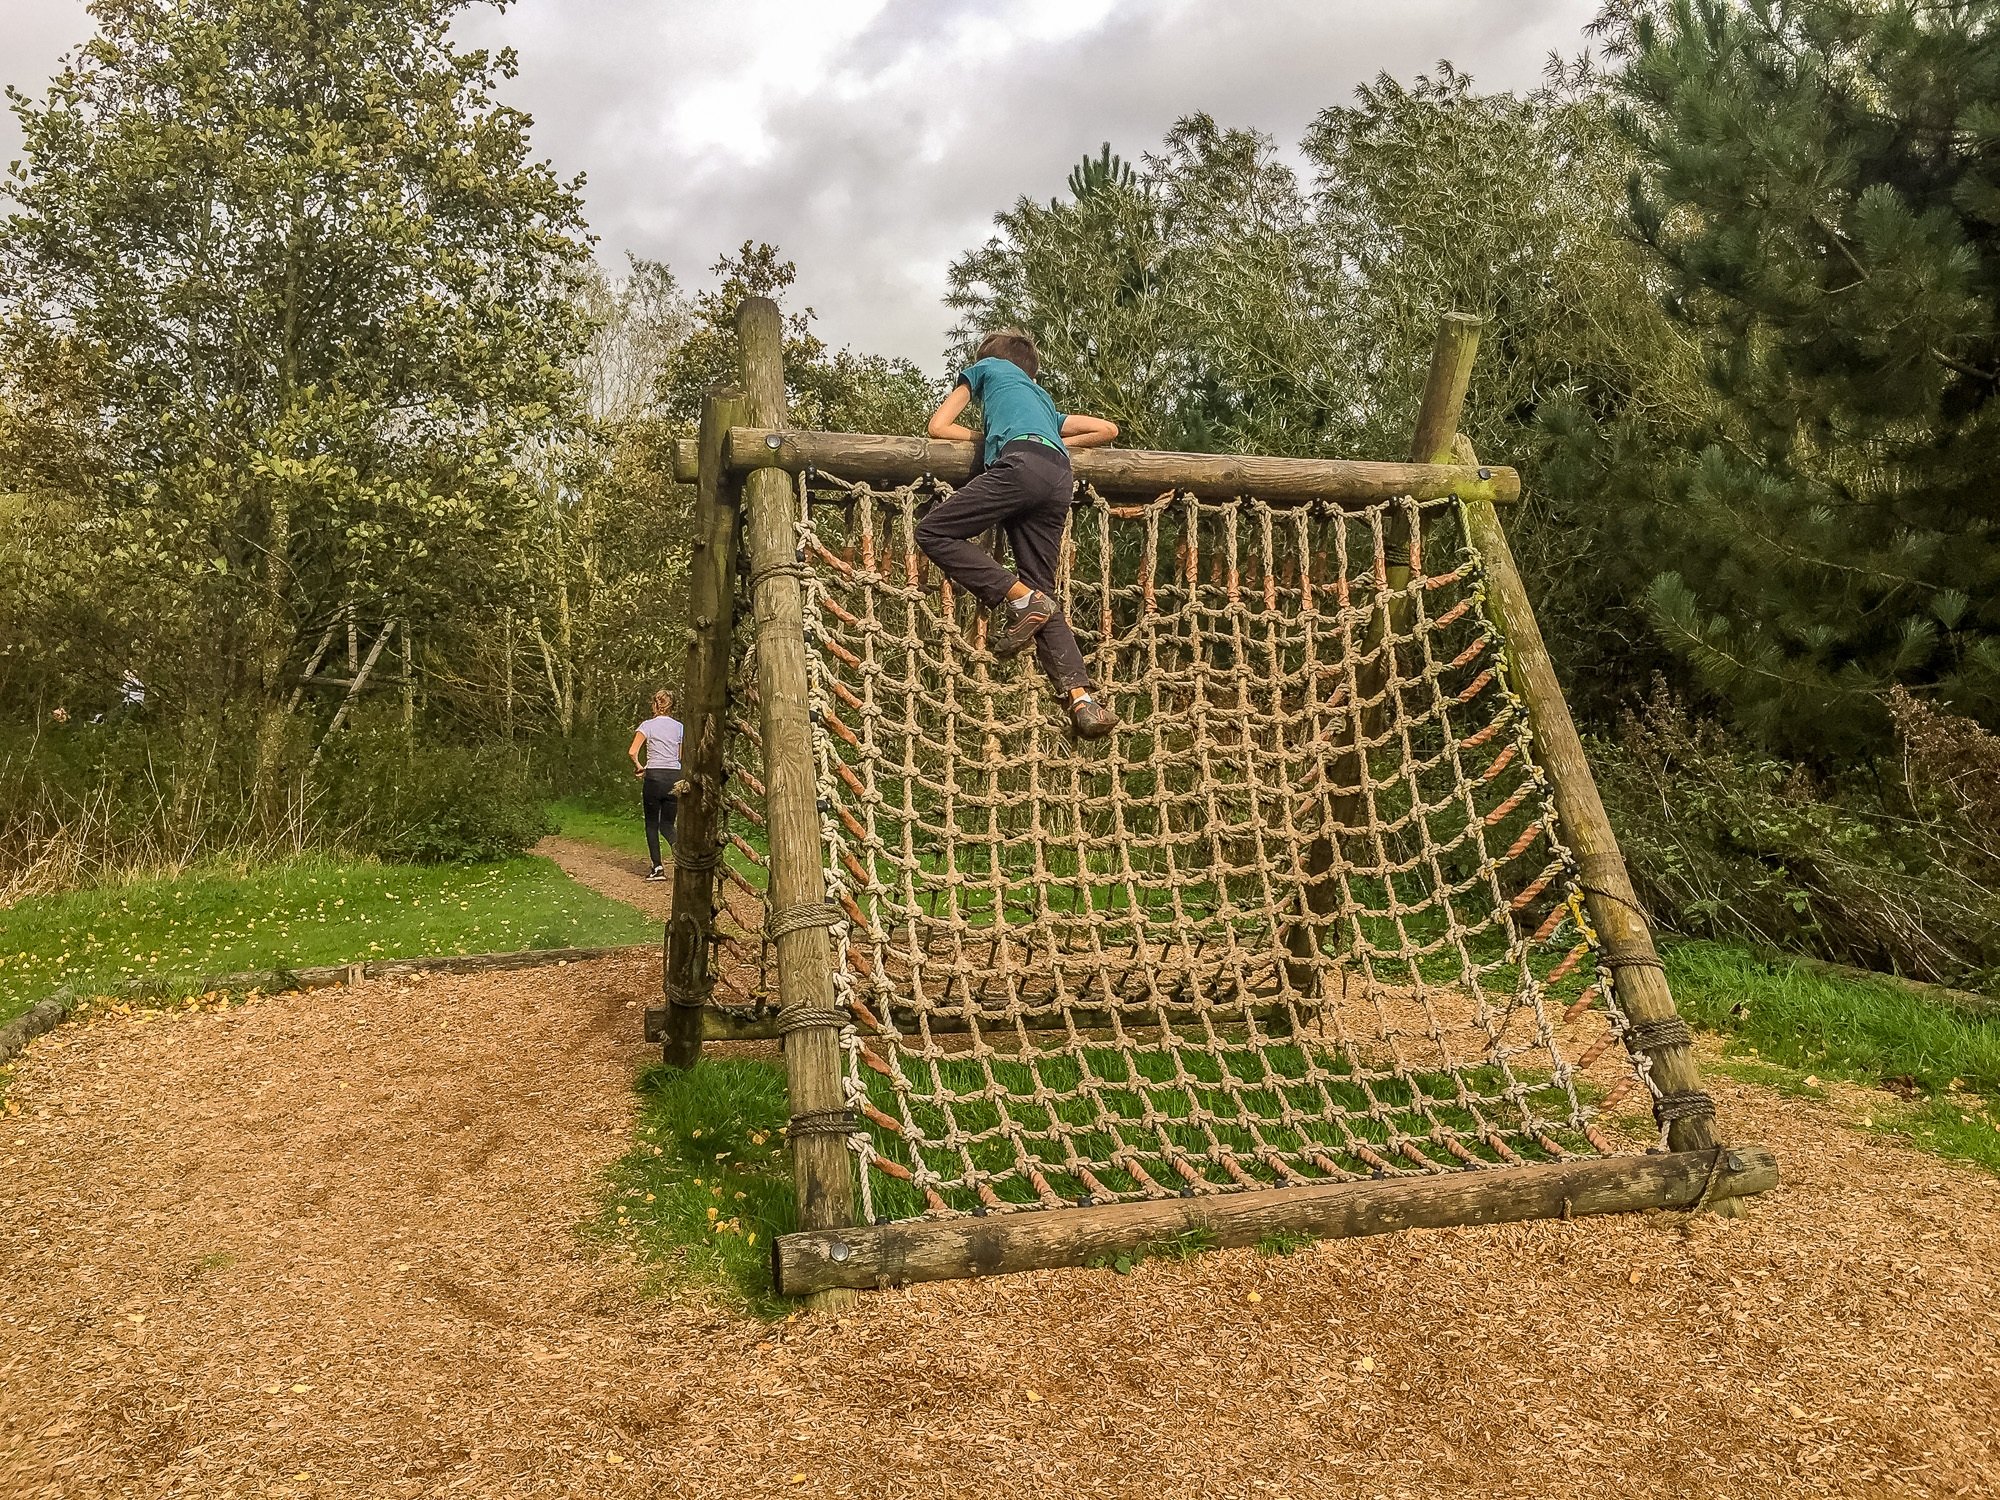 Tackling the assault course at Conkers